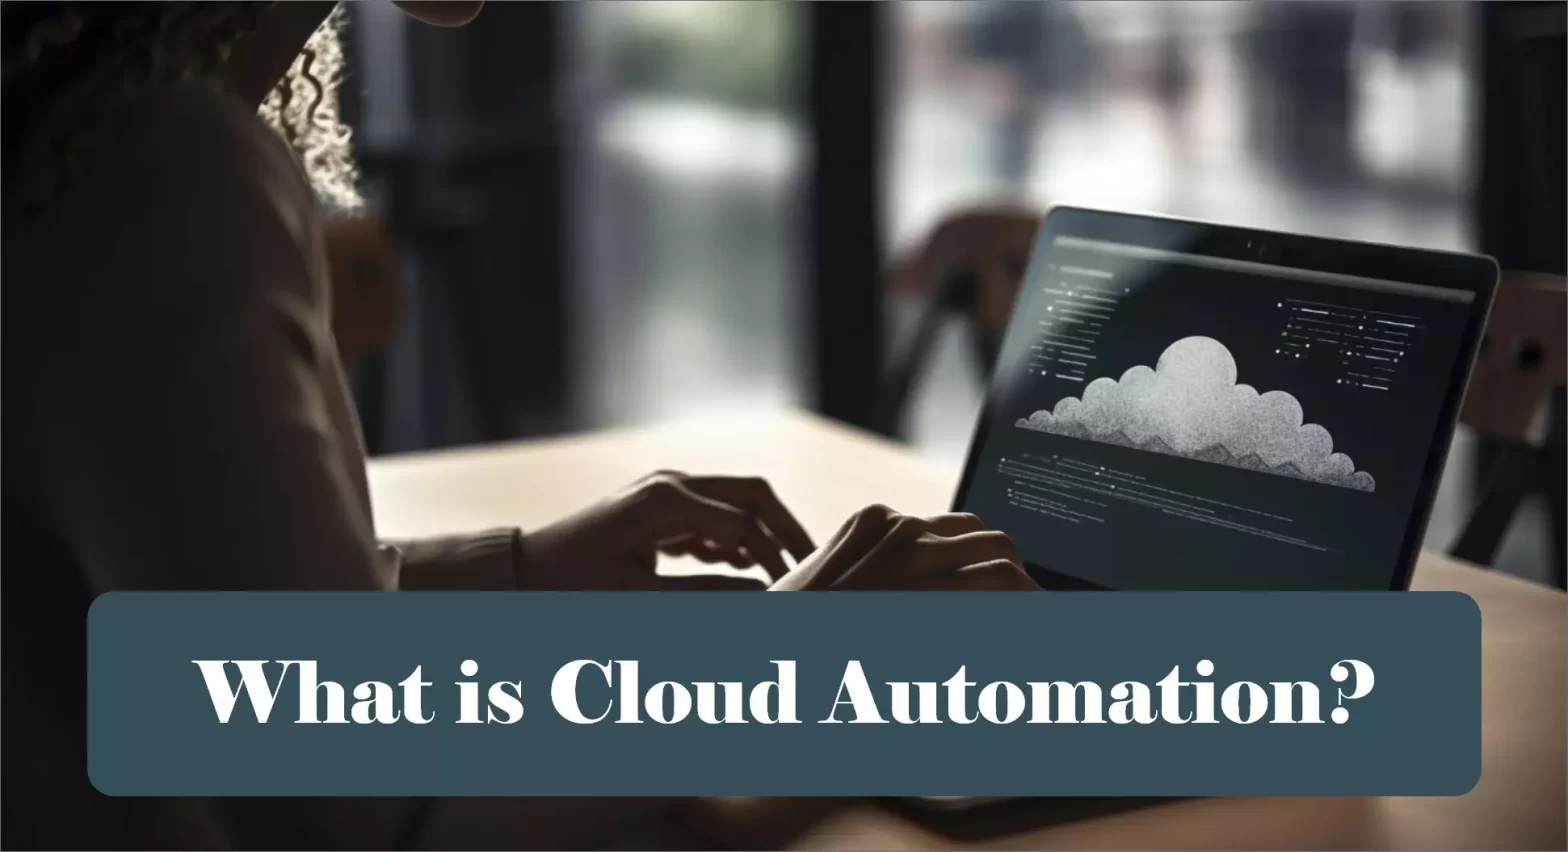 learn everything about Cloud Automation